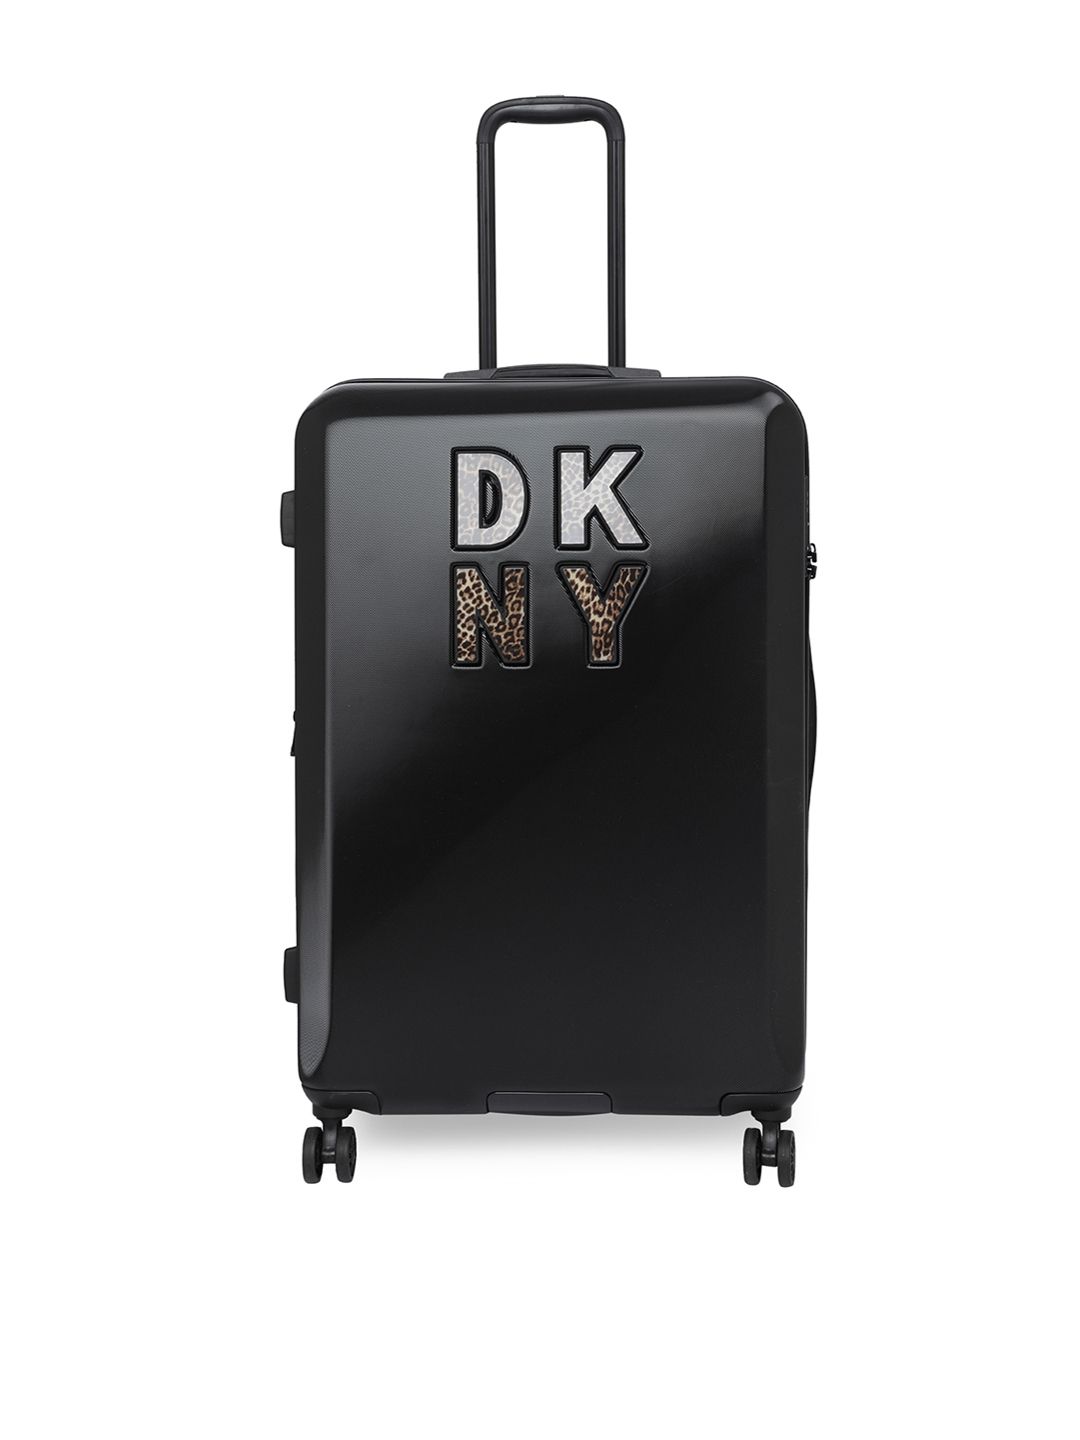 DKNY Black Solid Hard-Sided Large Trolley Suitcase Price in India